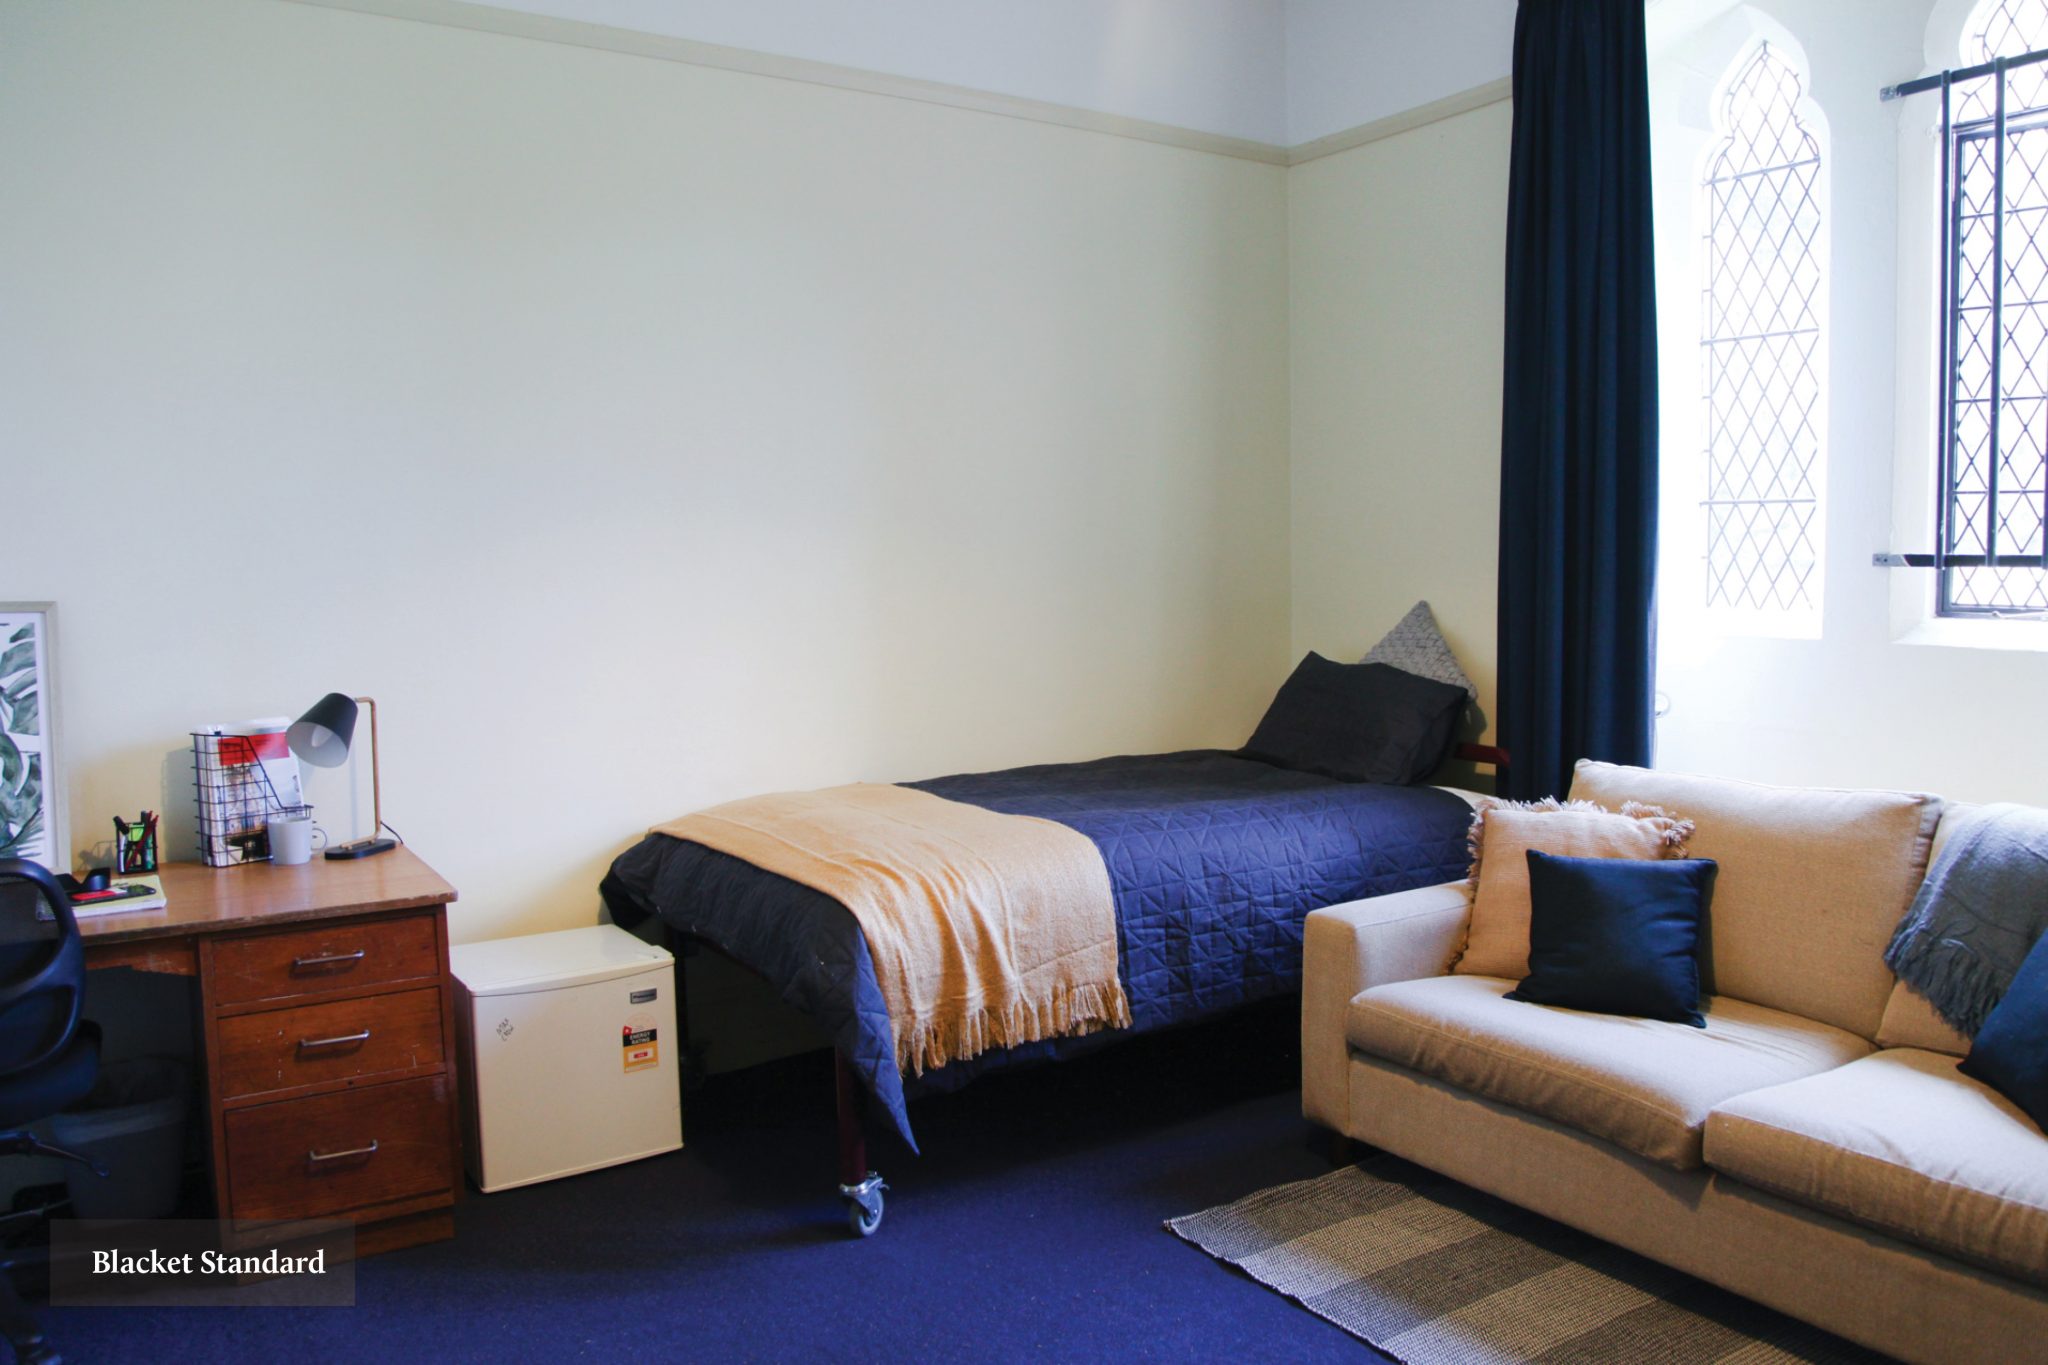 Generally speaking there are three standards of Undergraduate rooms allocated according to seniority and contribution to College: Freshmen rooms in the Arnott/Chapel Court buildings; larger rooms in the heritage buildings; and rooms with ensuite bathrooms and air-conditioning in the new Ivan Head Building. Each room is furnished with a bed, desk, desk chair and wardrobe. Other small items of furniture may be brought into College except in the Head Building which are fully furnished. All rooms have unlimited WiFi connectivity. Residence over University breaks is available upon application.